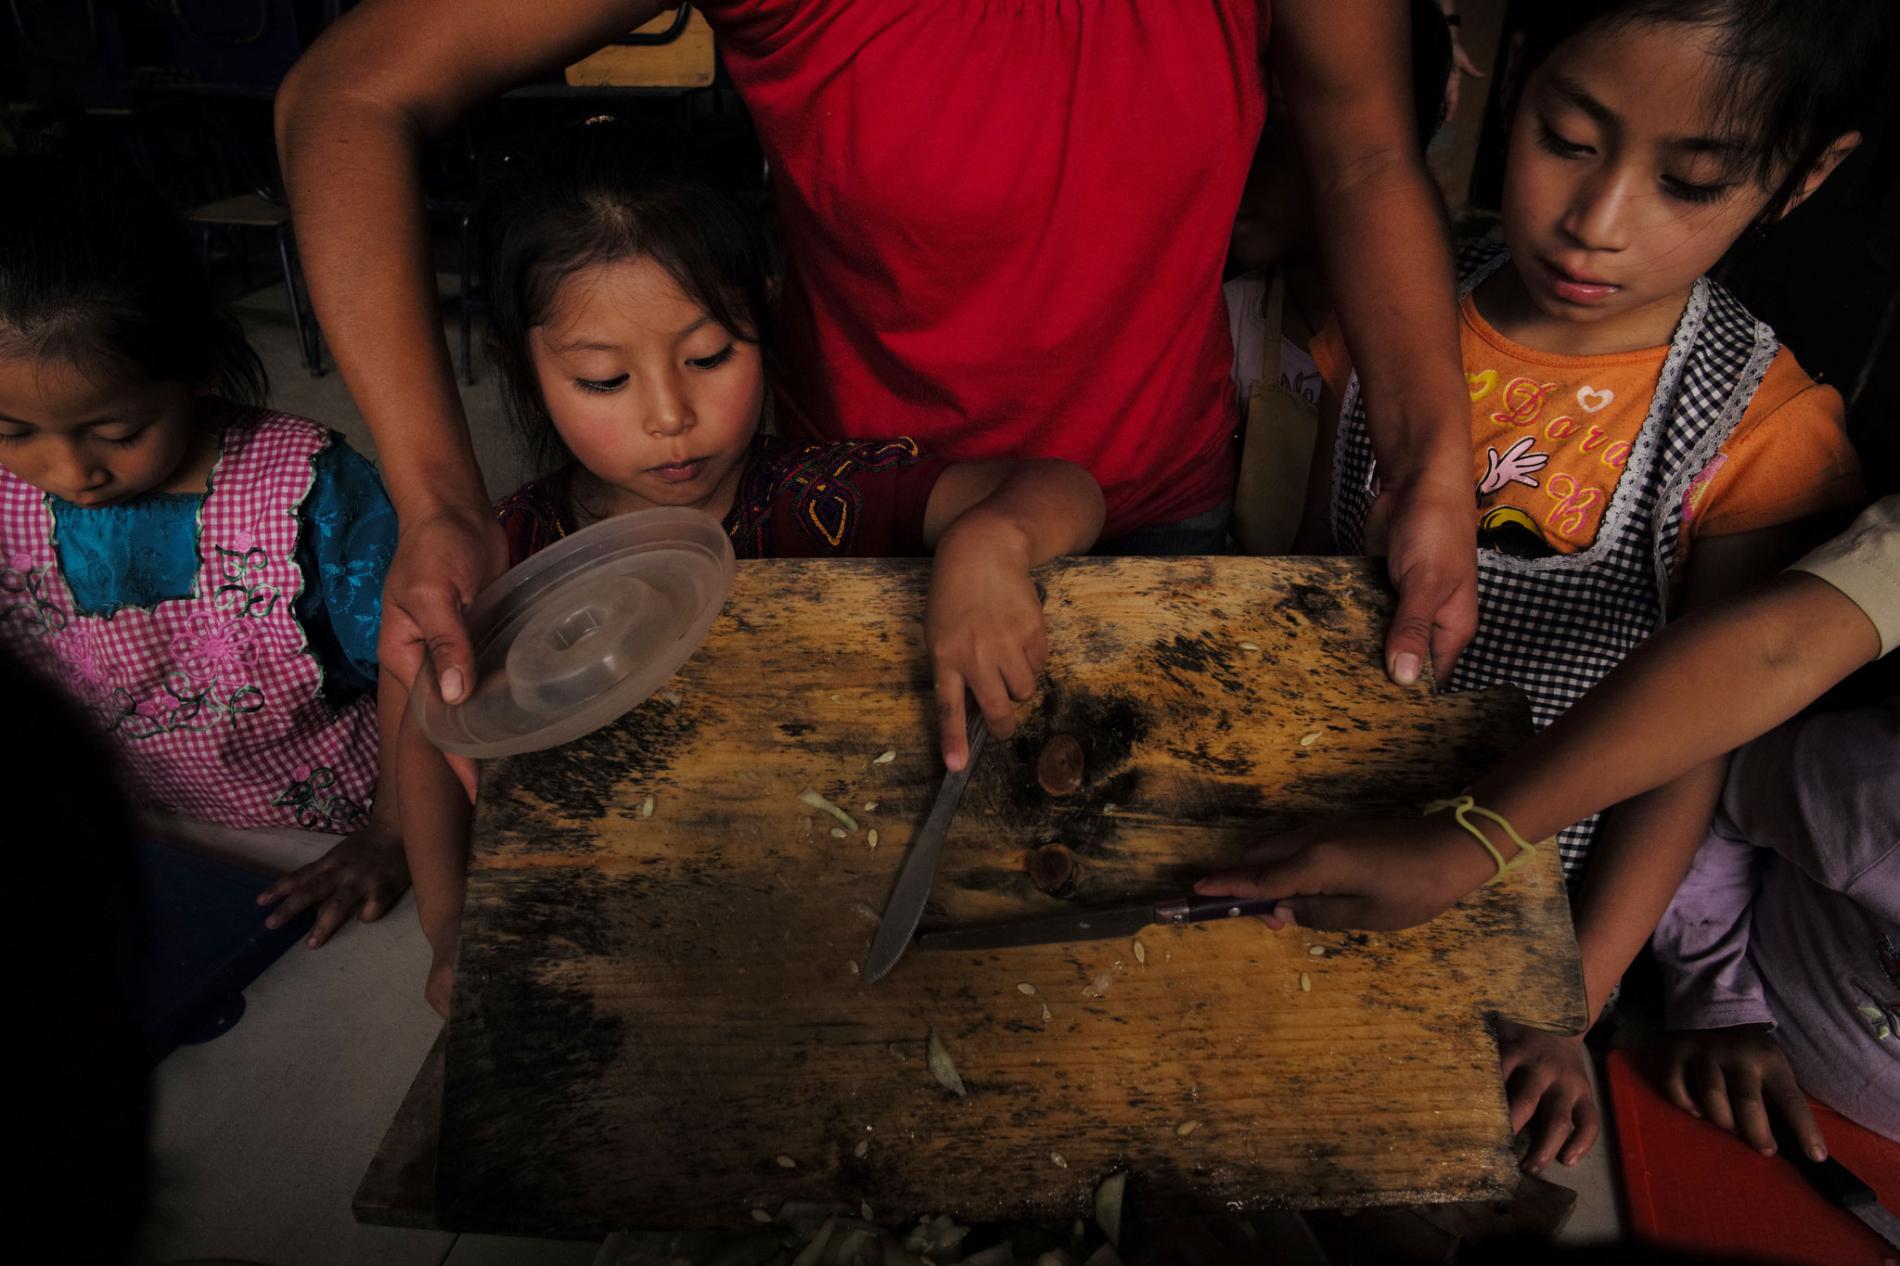 At Paso a Paso School in San Antonio Aguas Calientes, the kids make lunch with a stove made by the Ecocomal company, whose co-founder, Ana Luisa Herrera, also started the school. Safe, smokeless cookstoves promote education—because they help protect children’s health. Image by Lynn Johnson. Guatemala, 2017.